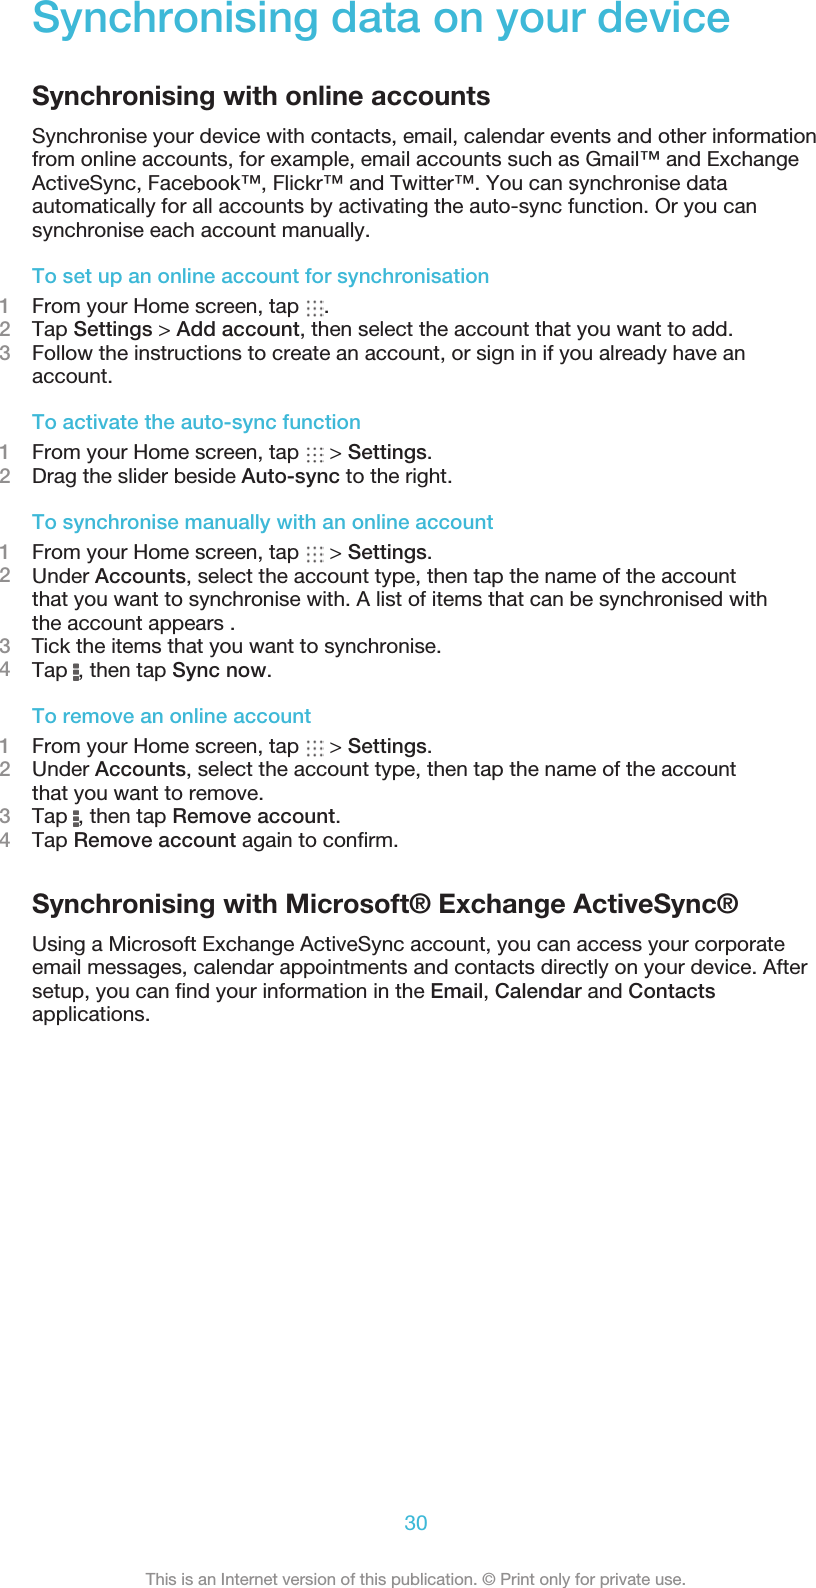 Synchronising data on your deviceSynchronising with online accountsSynchronise your device with contacts, email, calendar events and other informationfrom online accounts, for example, email accounts such as Gmail™ and ExchangeActiveSync, Facebook™, Flickr™ and Twitter™. You can synchronise dataautomatically for all accounts by activating the auto-sync function. Or you cansynchronise each account manually.To set up an online account for synchronisation1From your Home screen, tap  .2Tap Settings &gt; Add account, then select the account that you want to add.3Follow the instructions to create an account, or sign in if you already have anaccount.To activate the auto-sync function1From your Home screen, tap   &gt; Settings.2Drag the slider beside Auto-sync to the right.To synchronise manually with an online account1From your Home screen, tap   &gt; Settings.2Under Accounts, select the account type, then tap the name of the accountthat you want to synchronise with. A list of items that can be synchronised withthe account appears .3    Tick the items that you want to synchronise.4Tap  , then tap Sync now.To remove an online account1From your Home screen, tap   &gt; Settings.2Under Accounts, select the account type, then tap the name of the accountthat you want to remove.3Tap  , then tap Remove account.4Tap Remove account again to conﬁrm.Synchronising with Microsoft® Exchange ActiveSync®Using a Microsoft Exchange ActiveSync account, you can access your corporateemail messages, calendar appointments and contacts directly on your device. Aftersetup, you can ﬁnd your information in the Email, Calendar and Contactsapplications.30This is an Internet version of this publication. © Print only for private use.